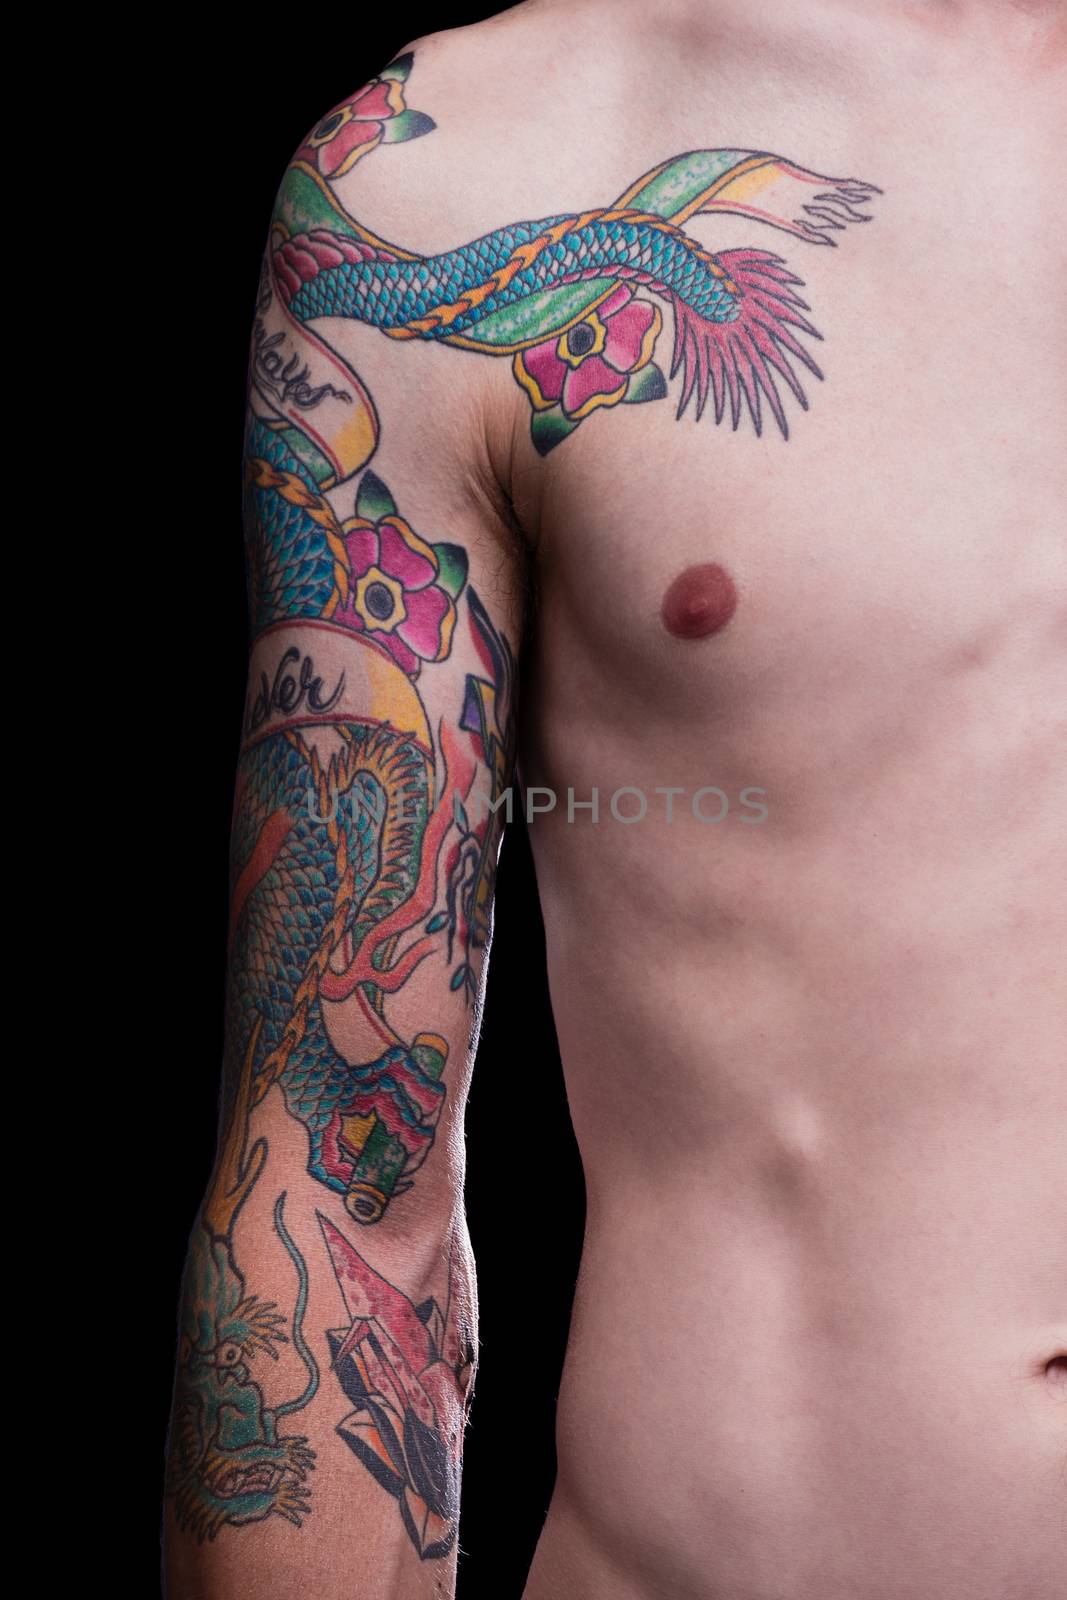 A man with a 3/4 sleeve of Japanese style tattoos including a dragon, origami crane and flowers.